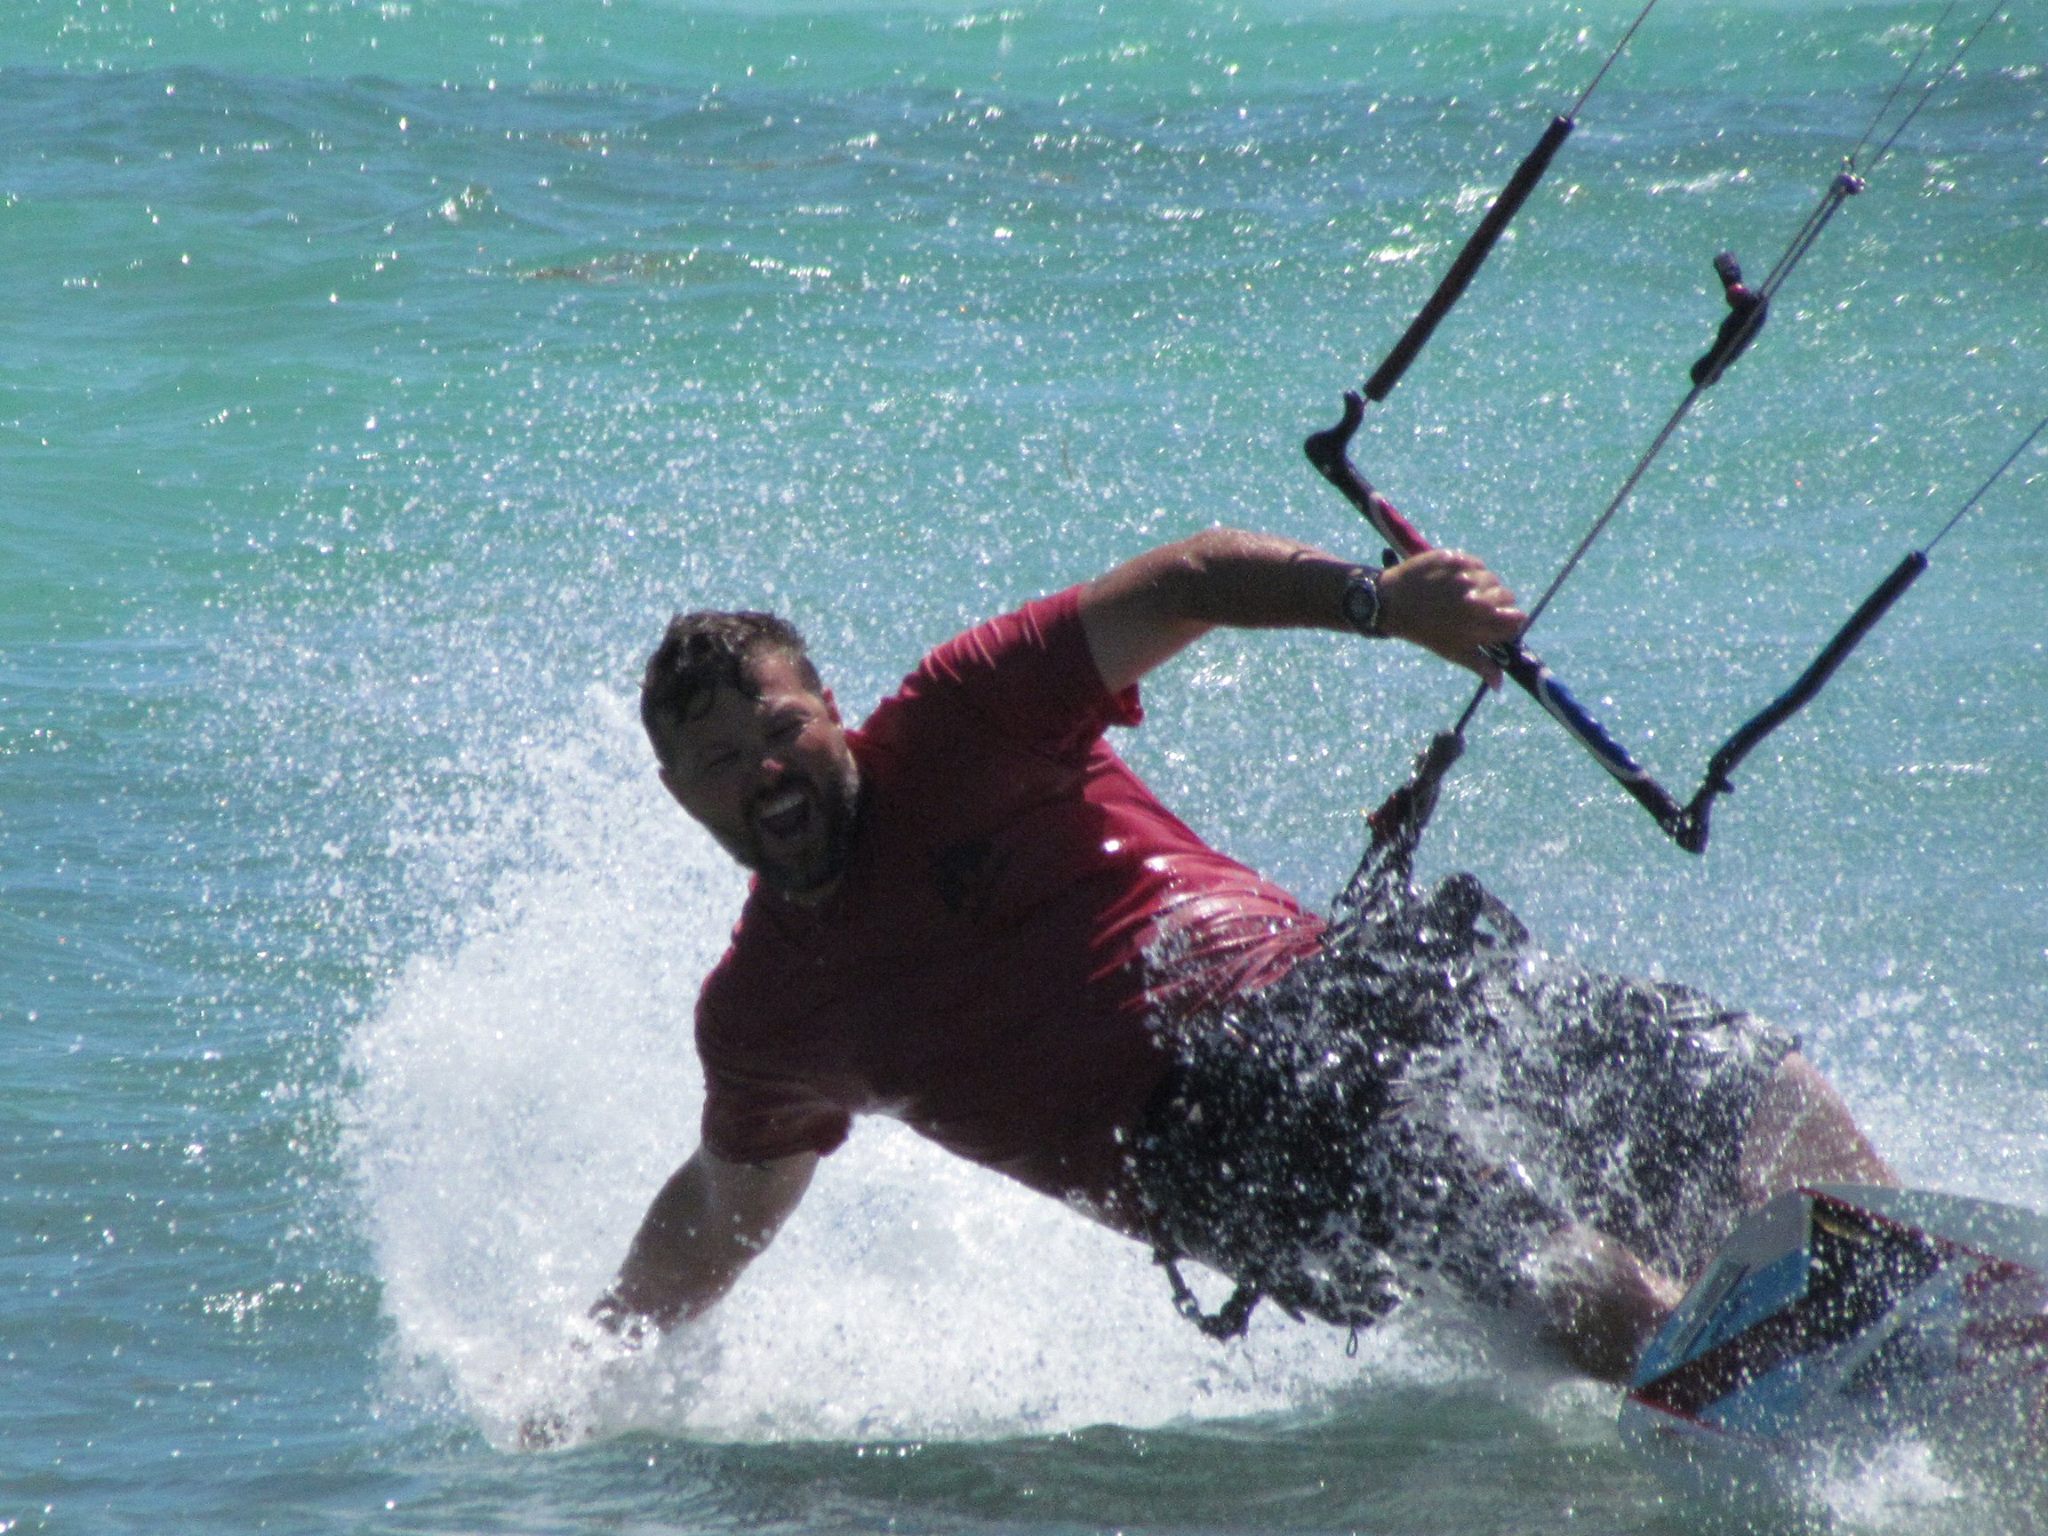 ERO deportation officer shares his passion for wind sports with wounded warriors